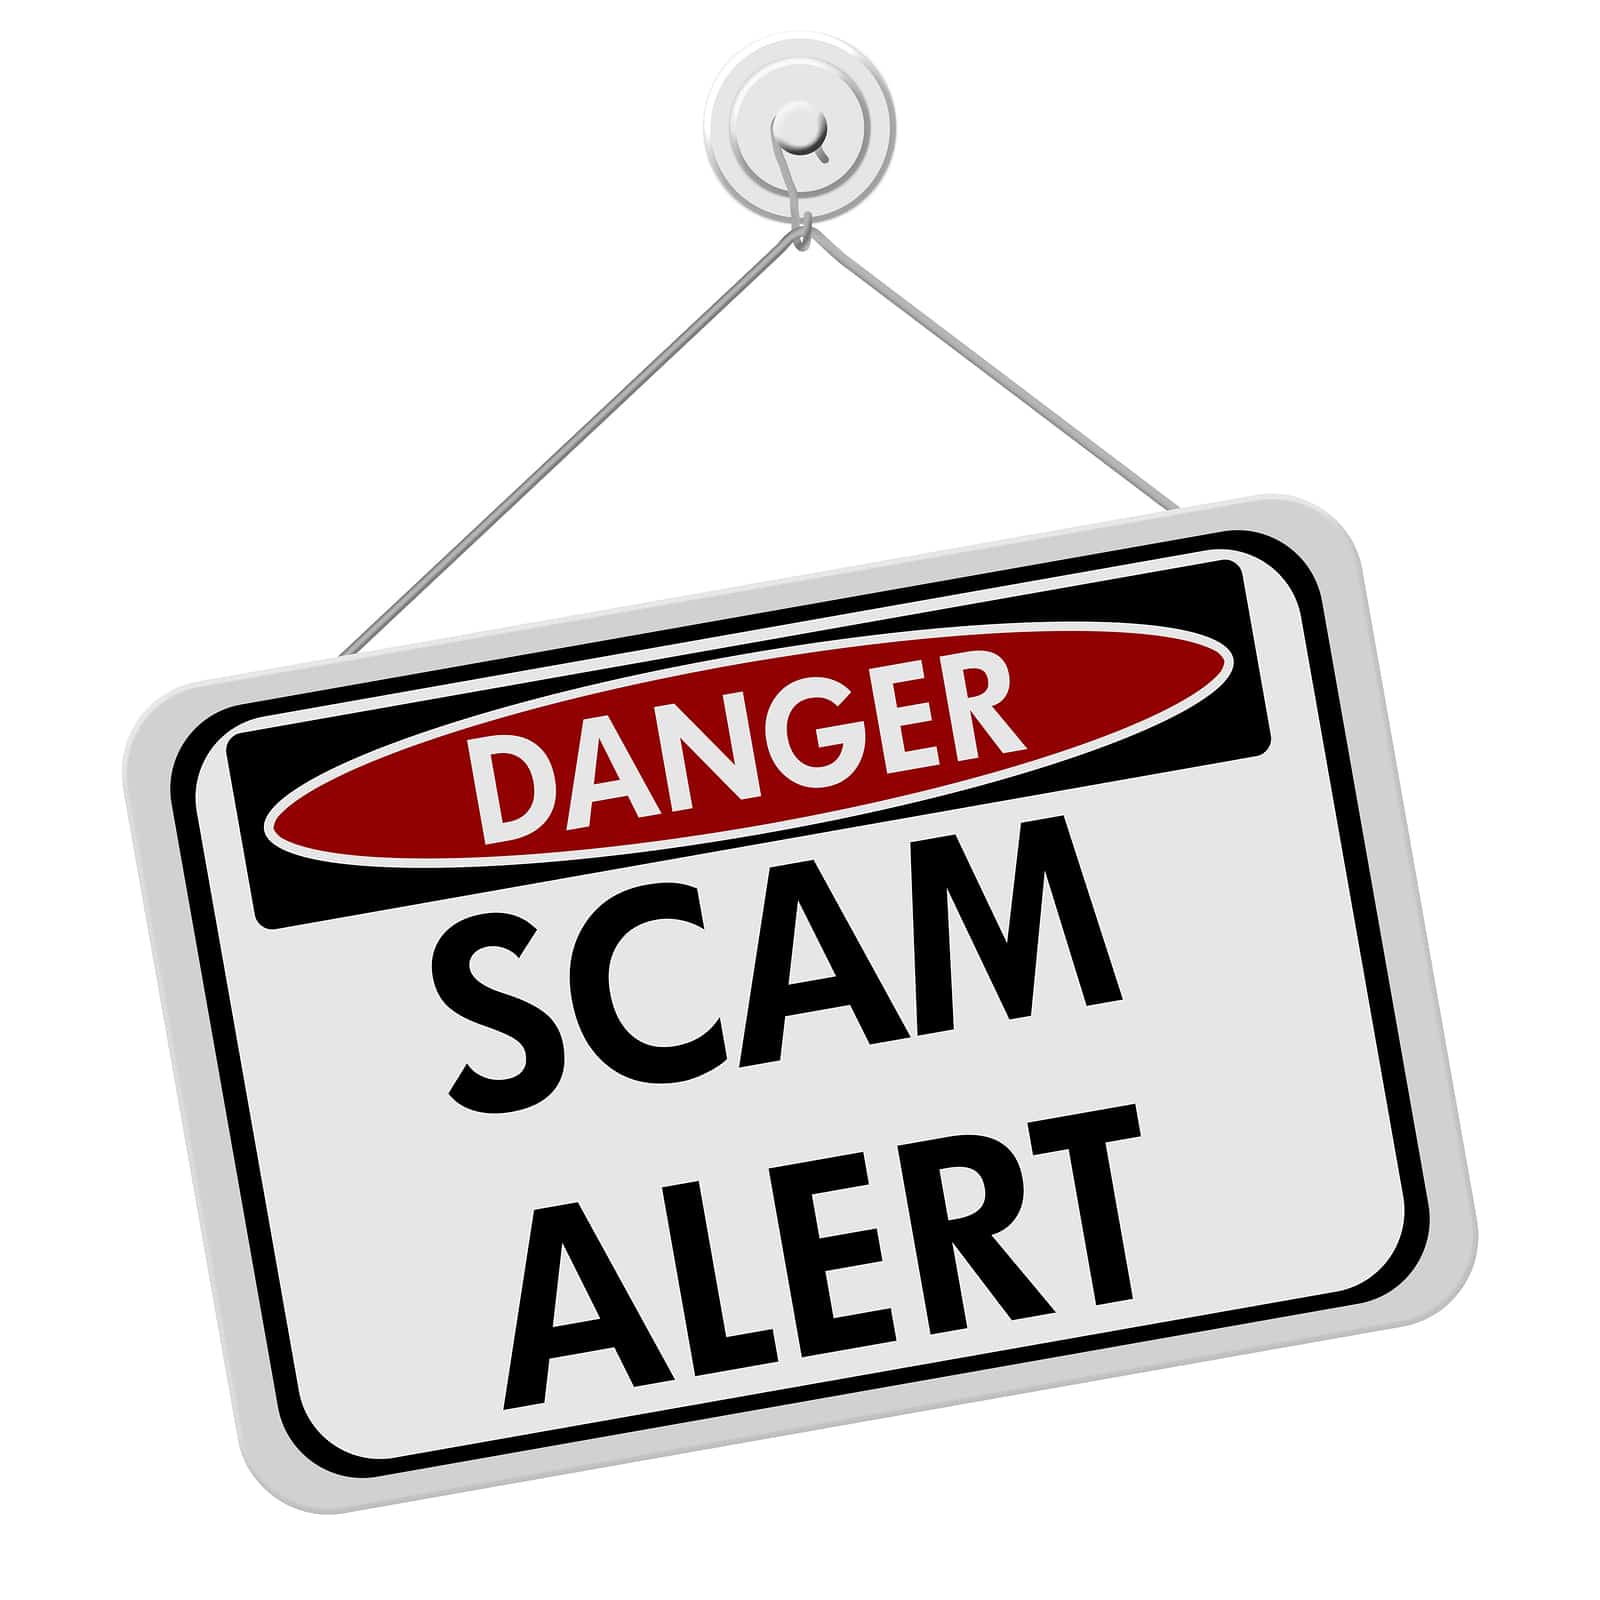 Scammers pose as company execs in wire transfer spam campaign